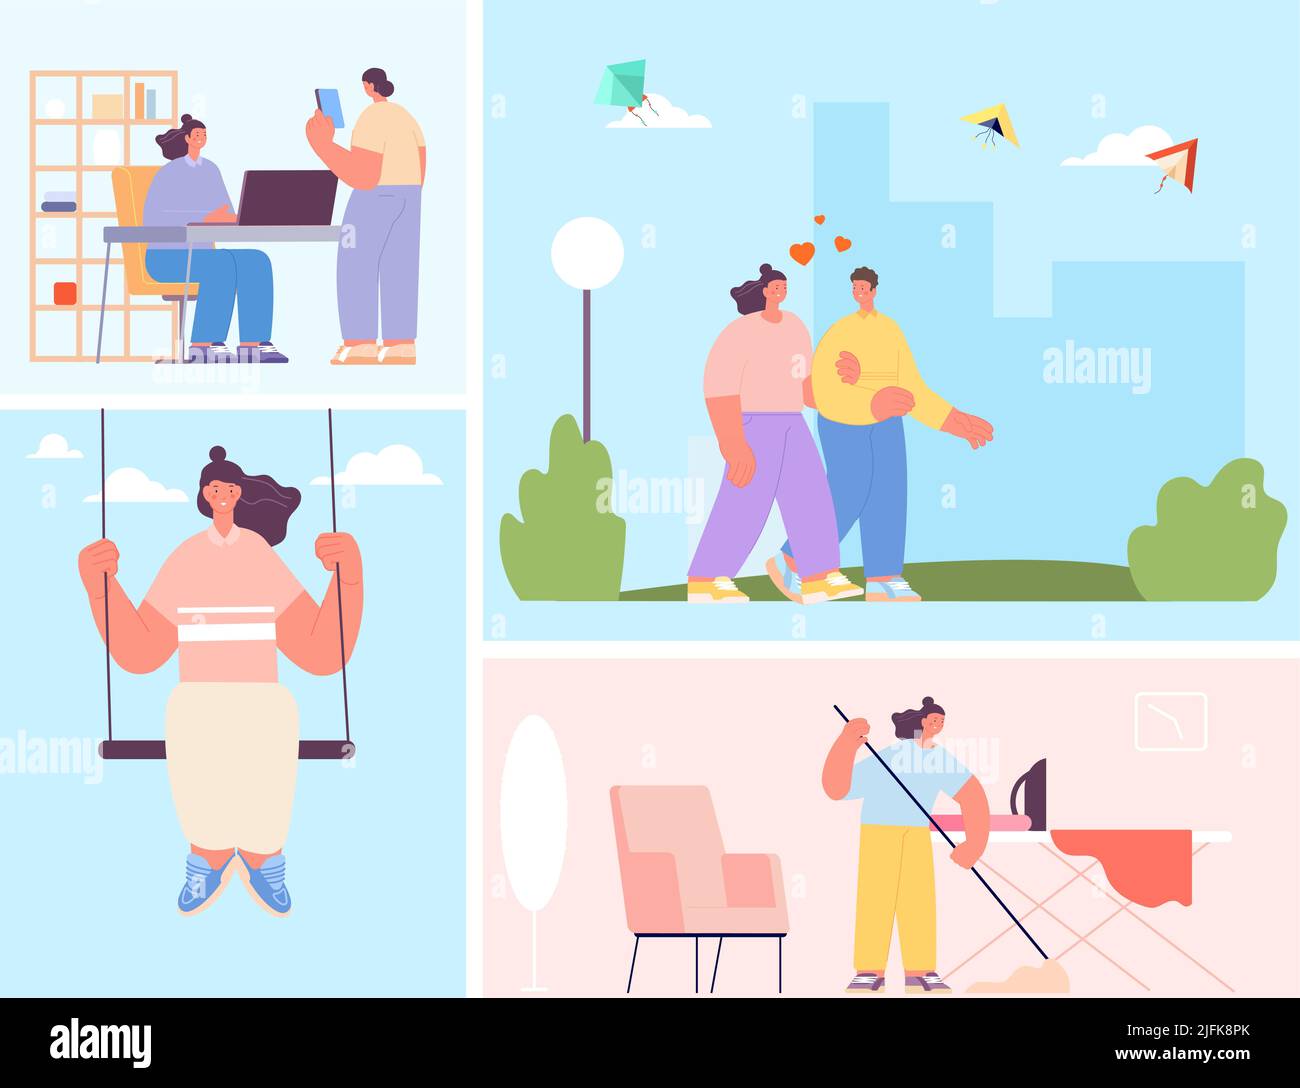 Girl daily routine. Female character working, cleaning home and walking with boyfriend. Girl on swing, happy woman vector scenes Stock Vector